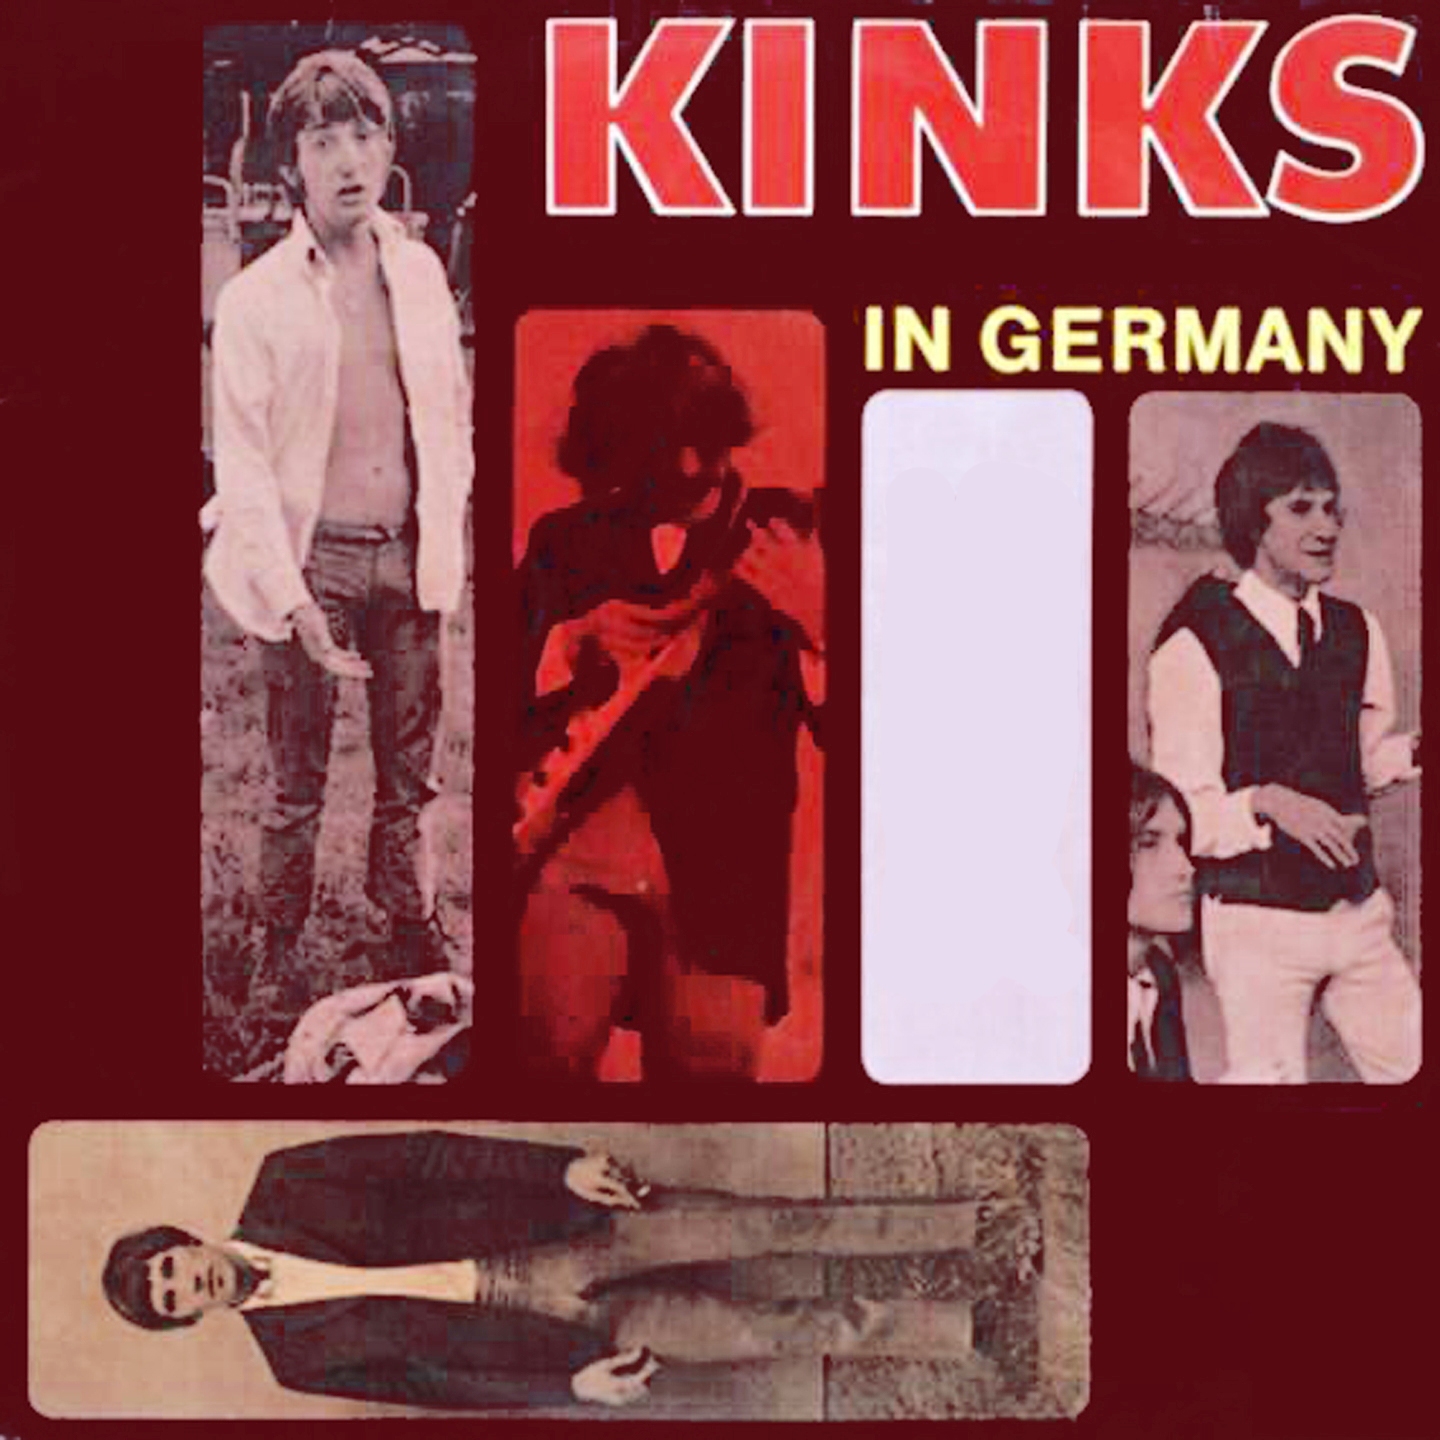 The Kinks in Germany